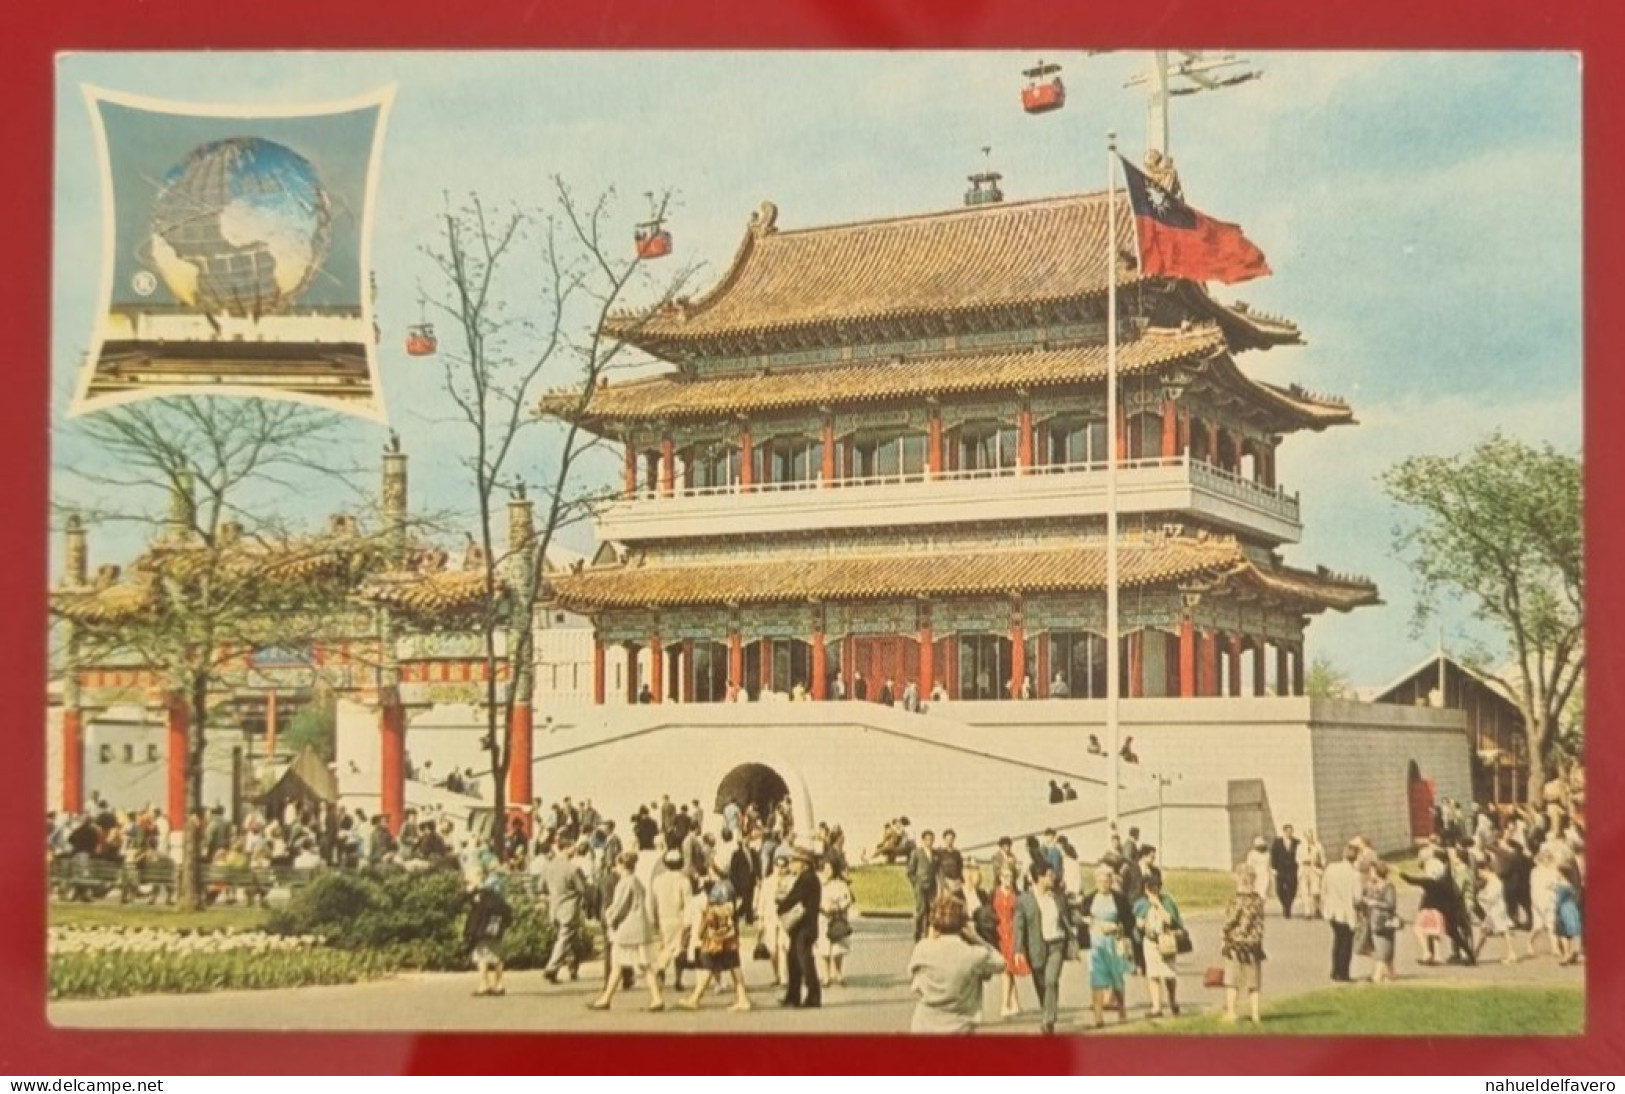 Uncirculated Postcard - USA - NY, NEW YORK WORLD'S FAIR 1964-65 - REPUBLICOF CHINA PAVILION - Exhibitions